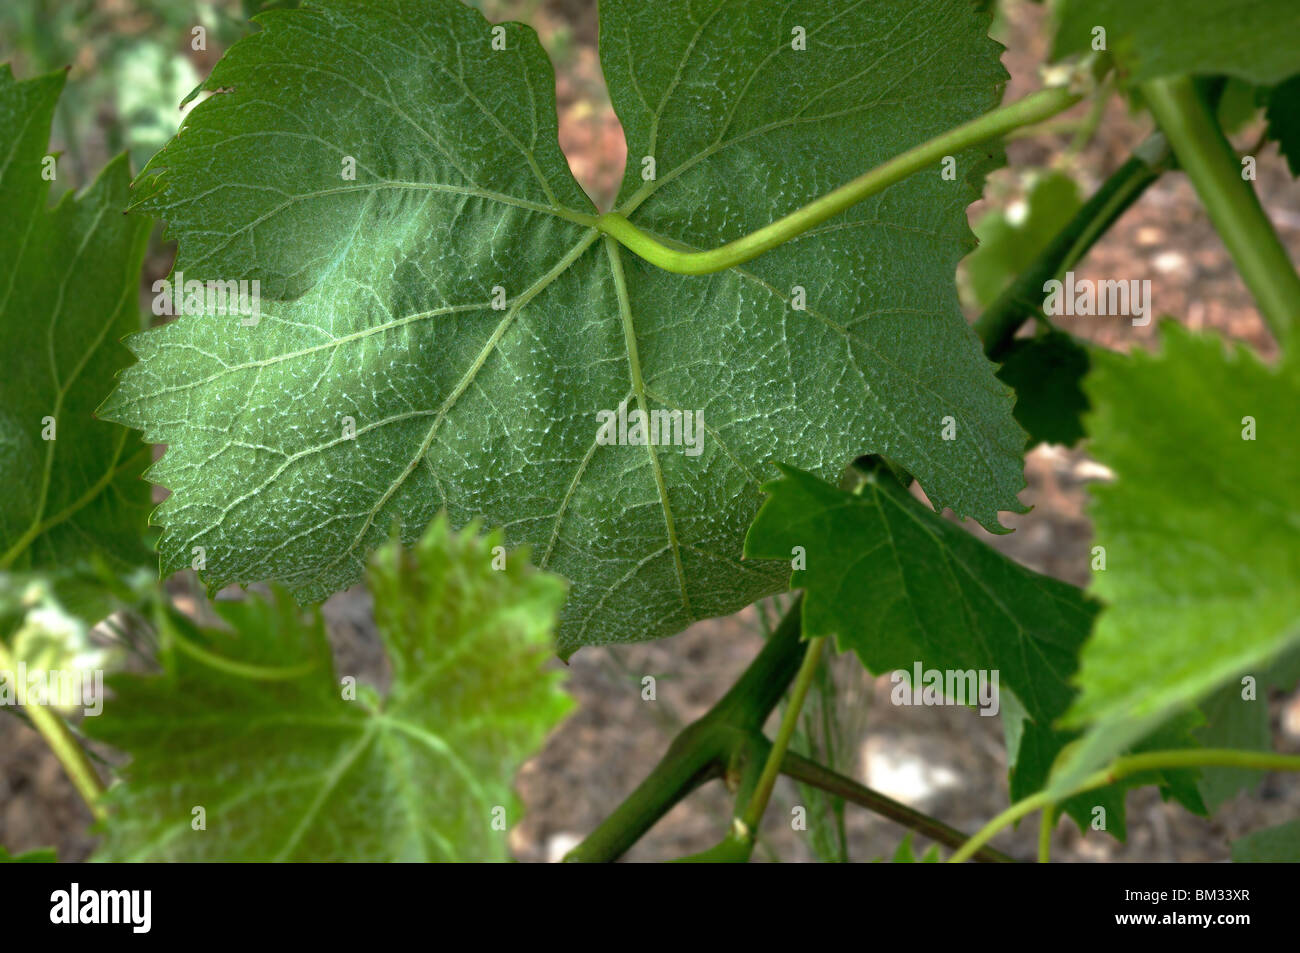 The white filaments of downy mildew on the underside of a grape vine leaf Stock Photo